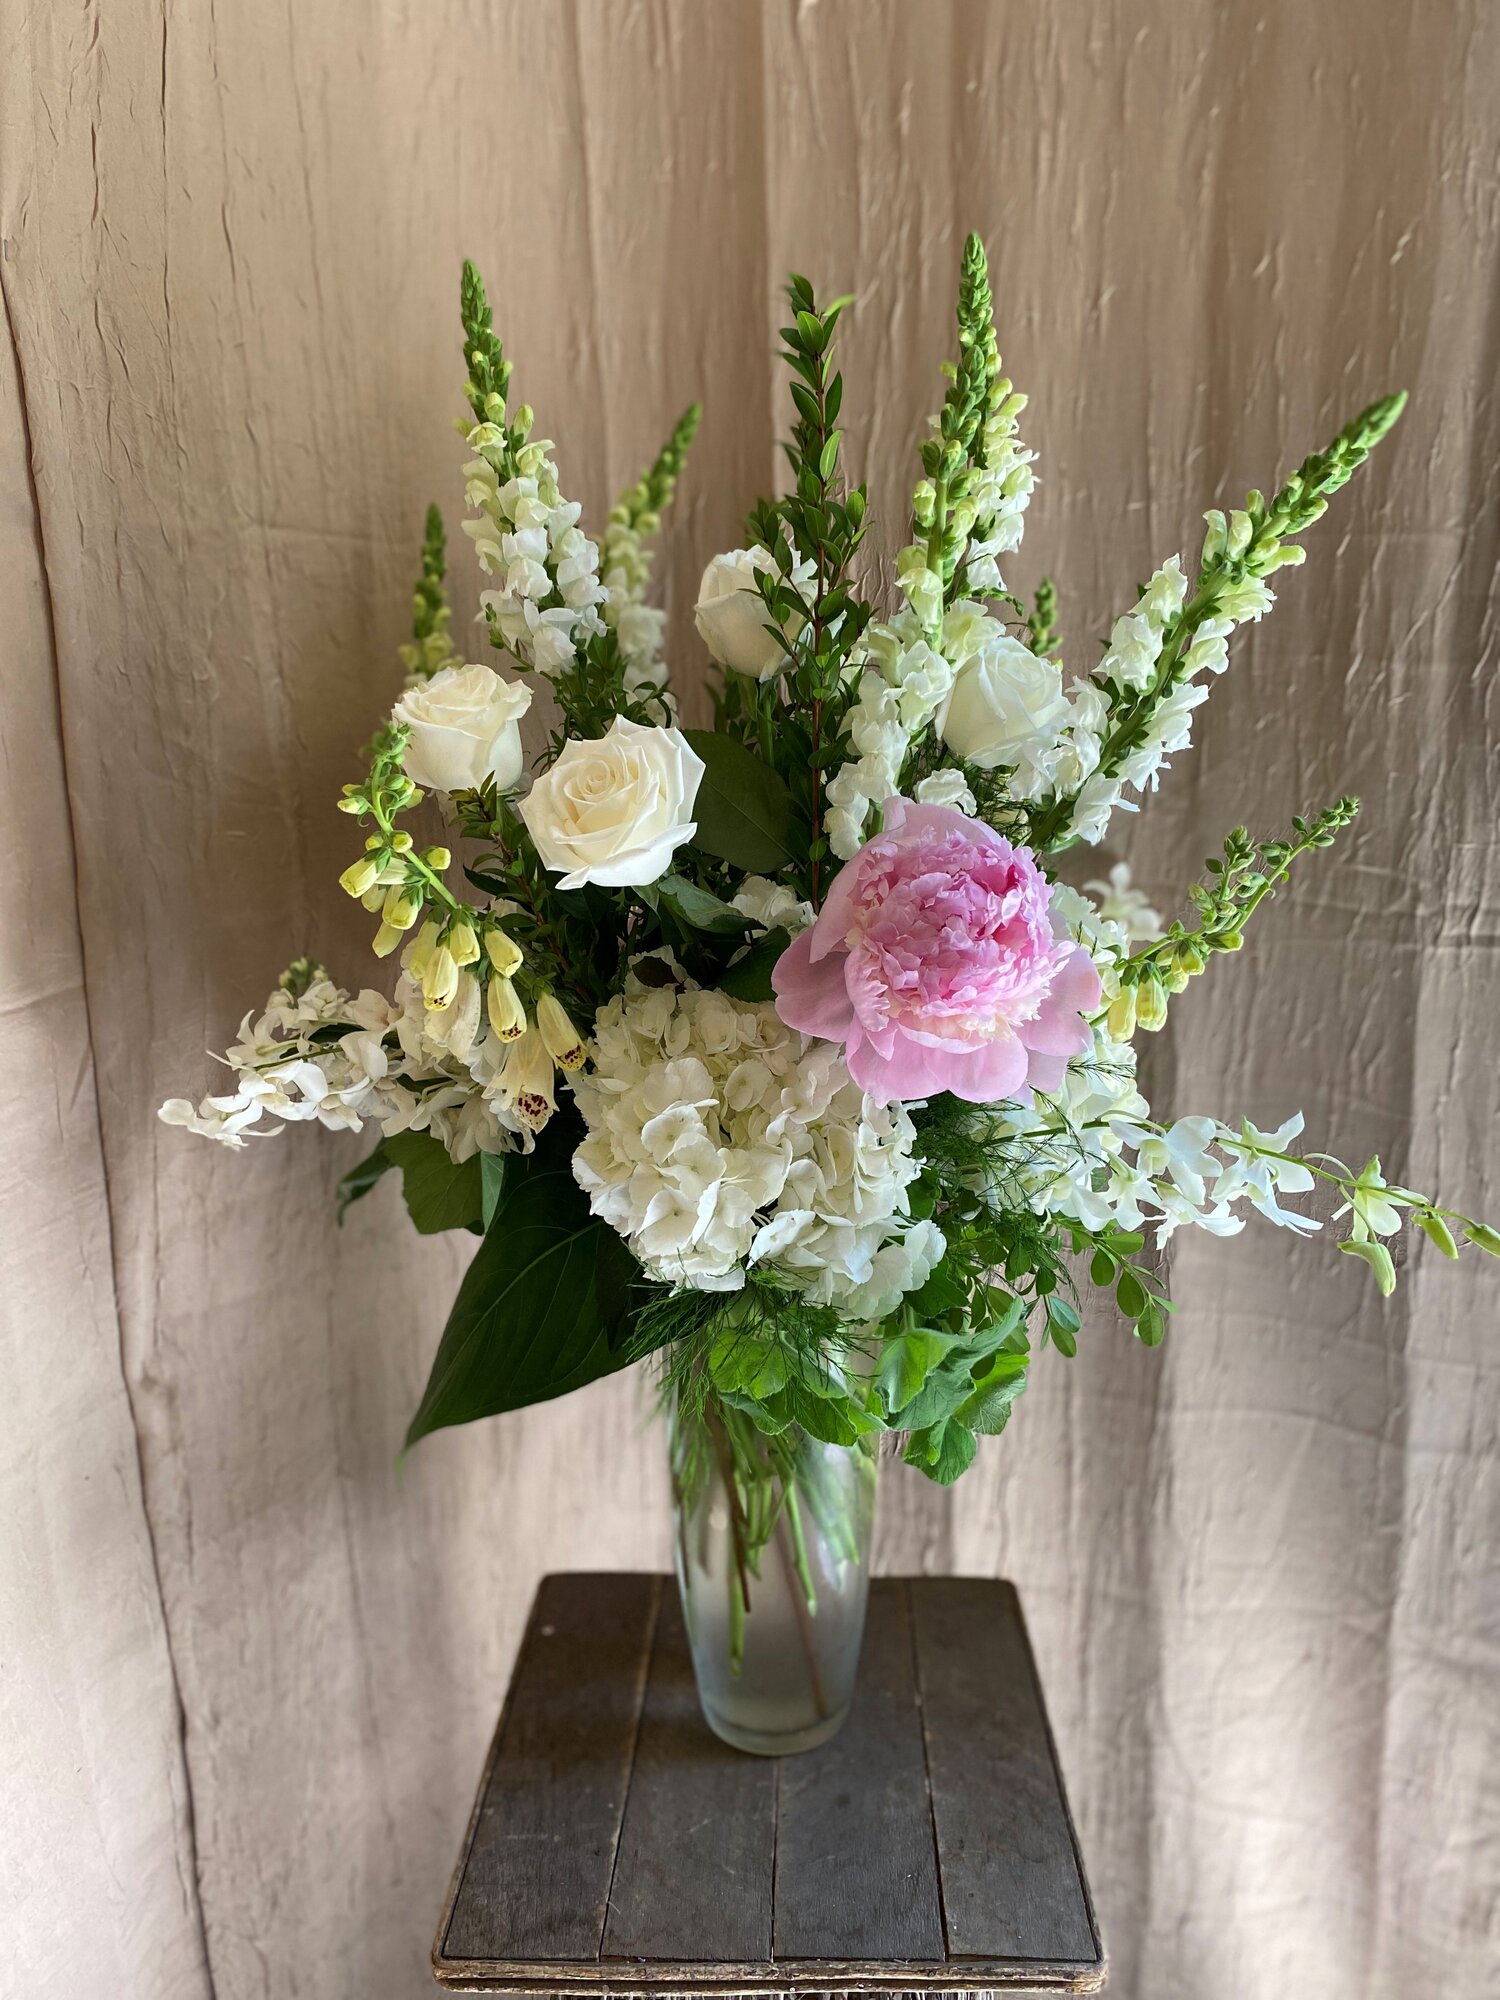 Stems Market – Fresh Cut Flowers for Everyday and Events